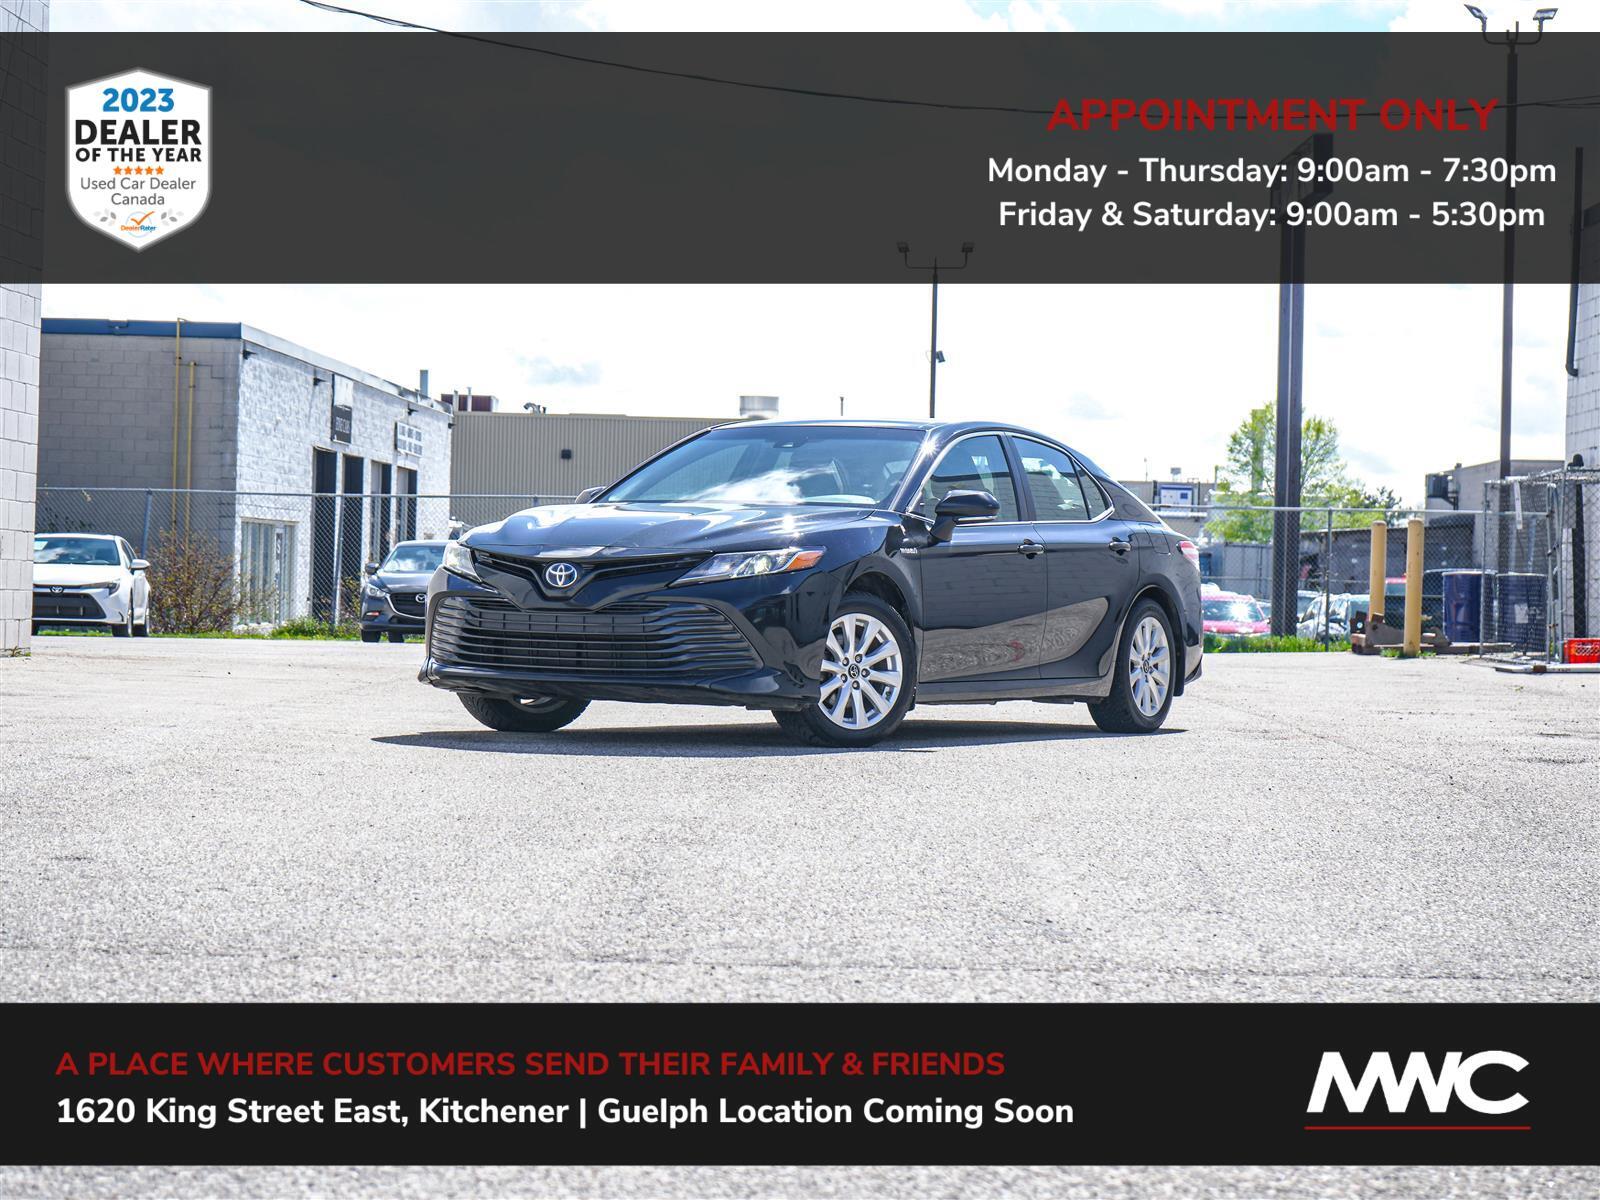 2018 Toyota Camry HYBRID LE | 17 IN GUELPH, BY APPT. ONLY